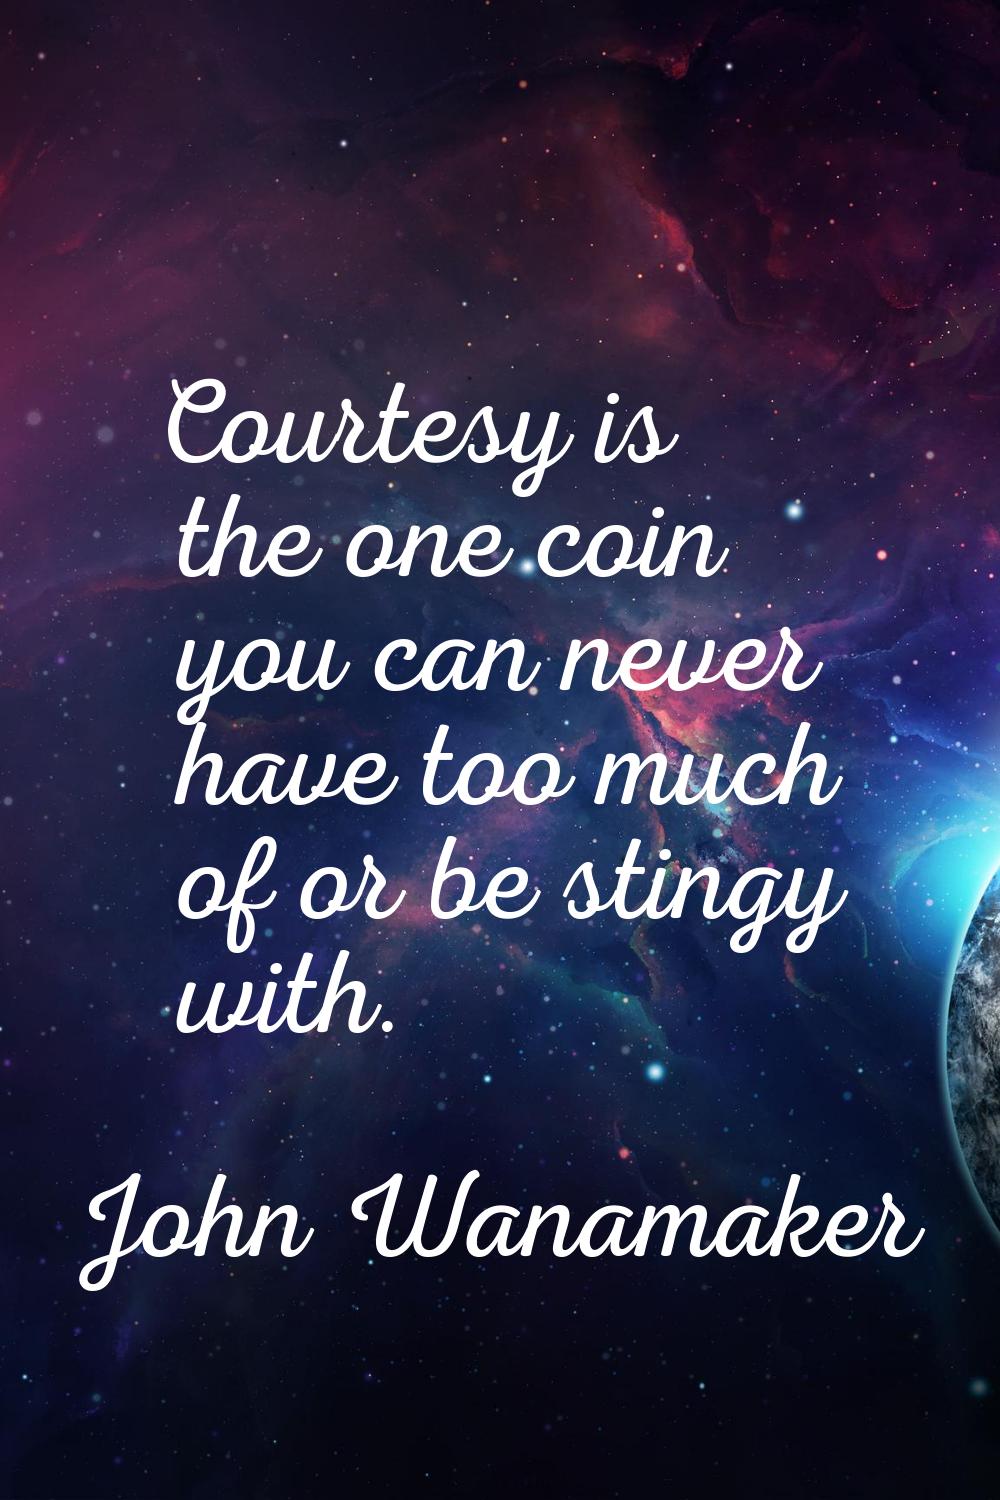 Courtesy is the one coin you can never have too much of or be stingy with.